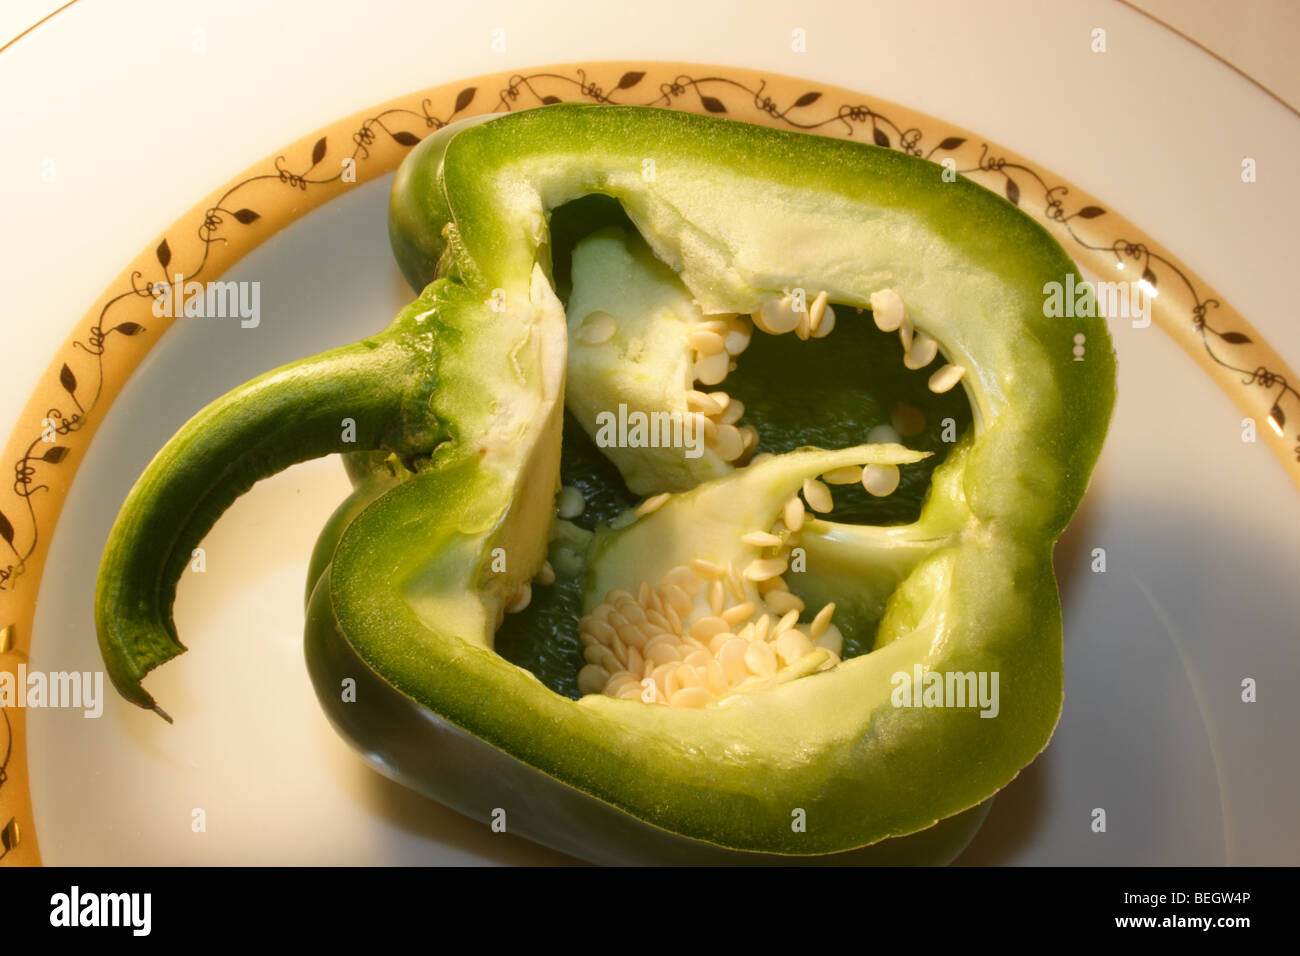 Sliced green bell pepper being prepared for meal Stock Photo